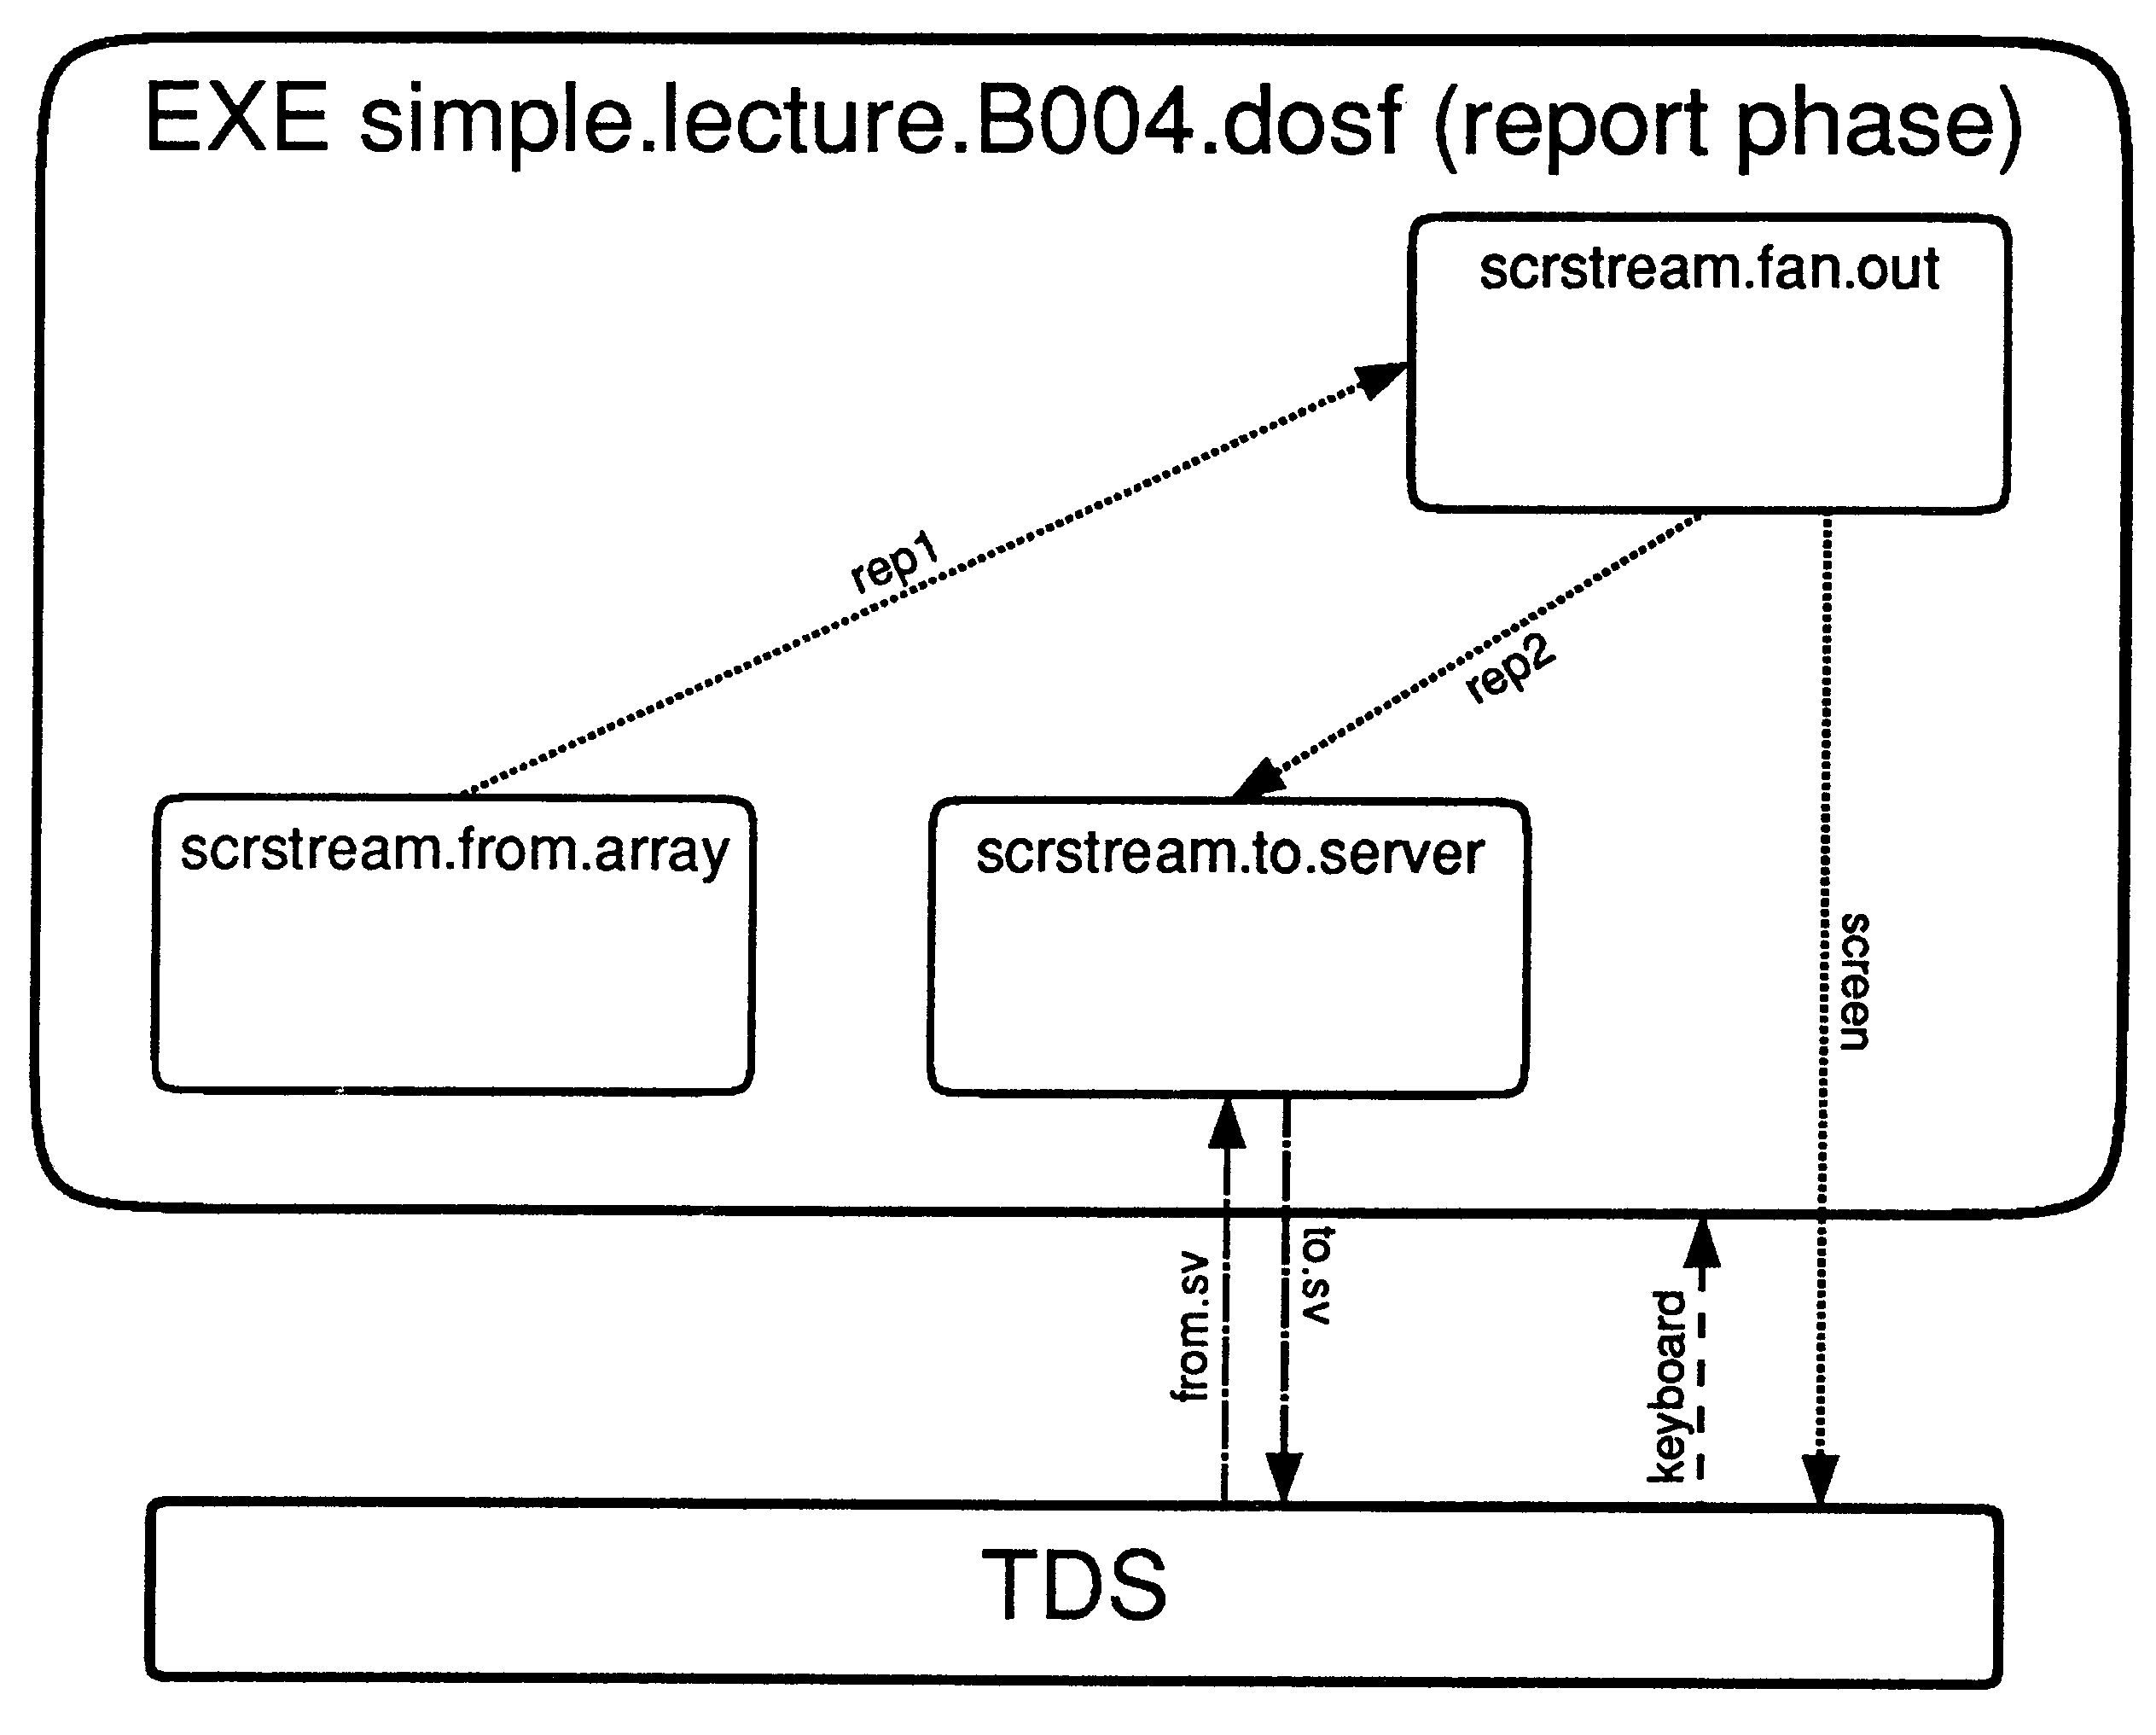 simple.lecture.B004.dosf (report
phase)